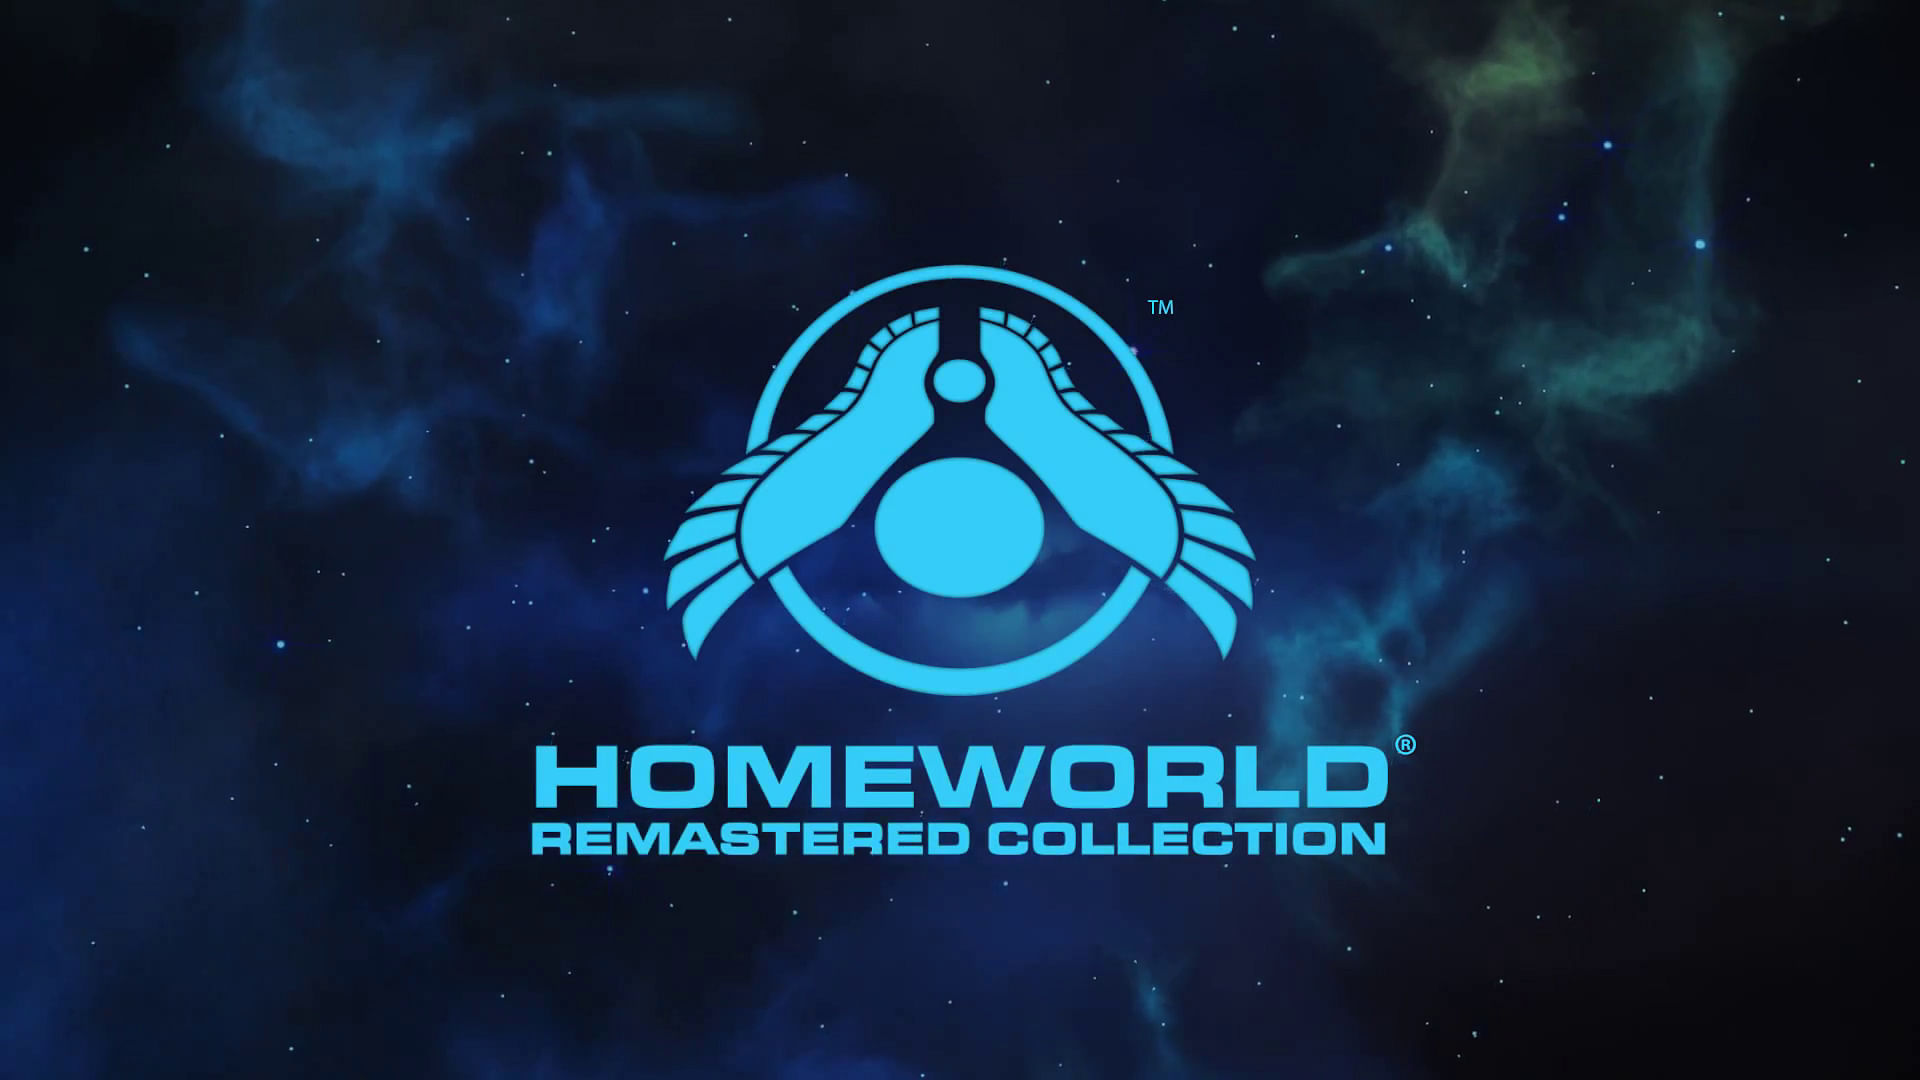 Homeworld Remastered Collection release date and trailer revealed1920 x 1080